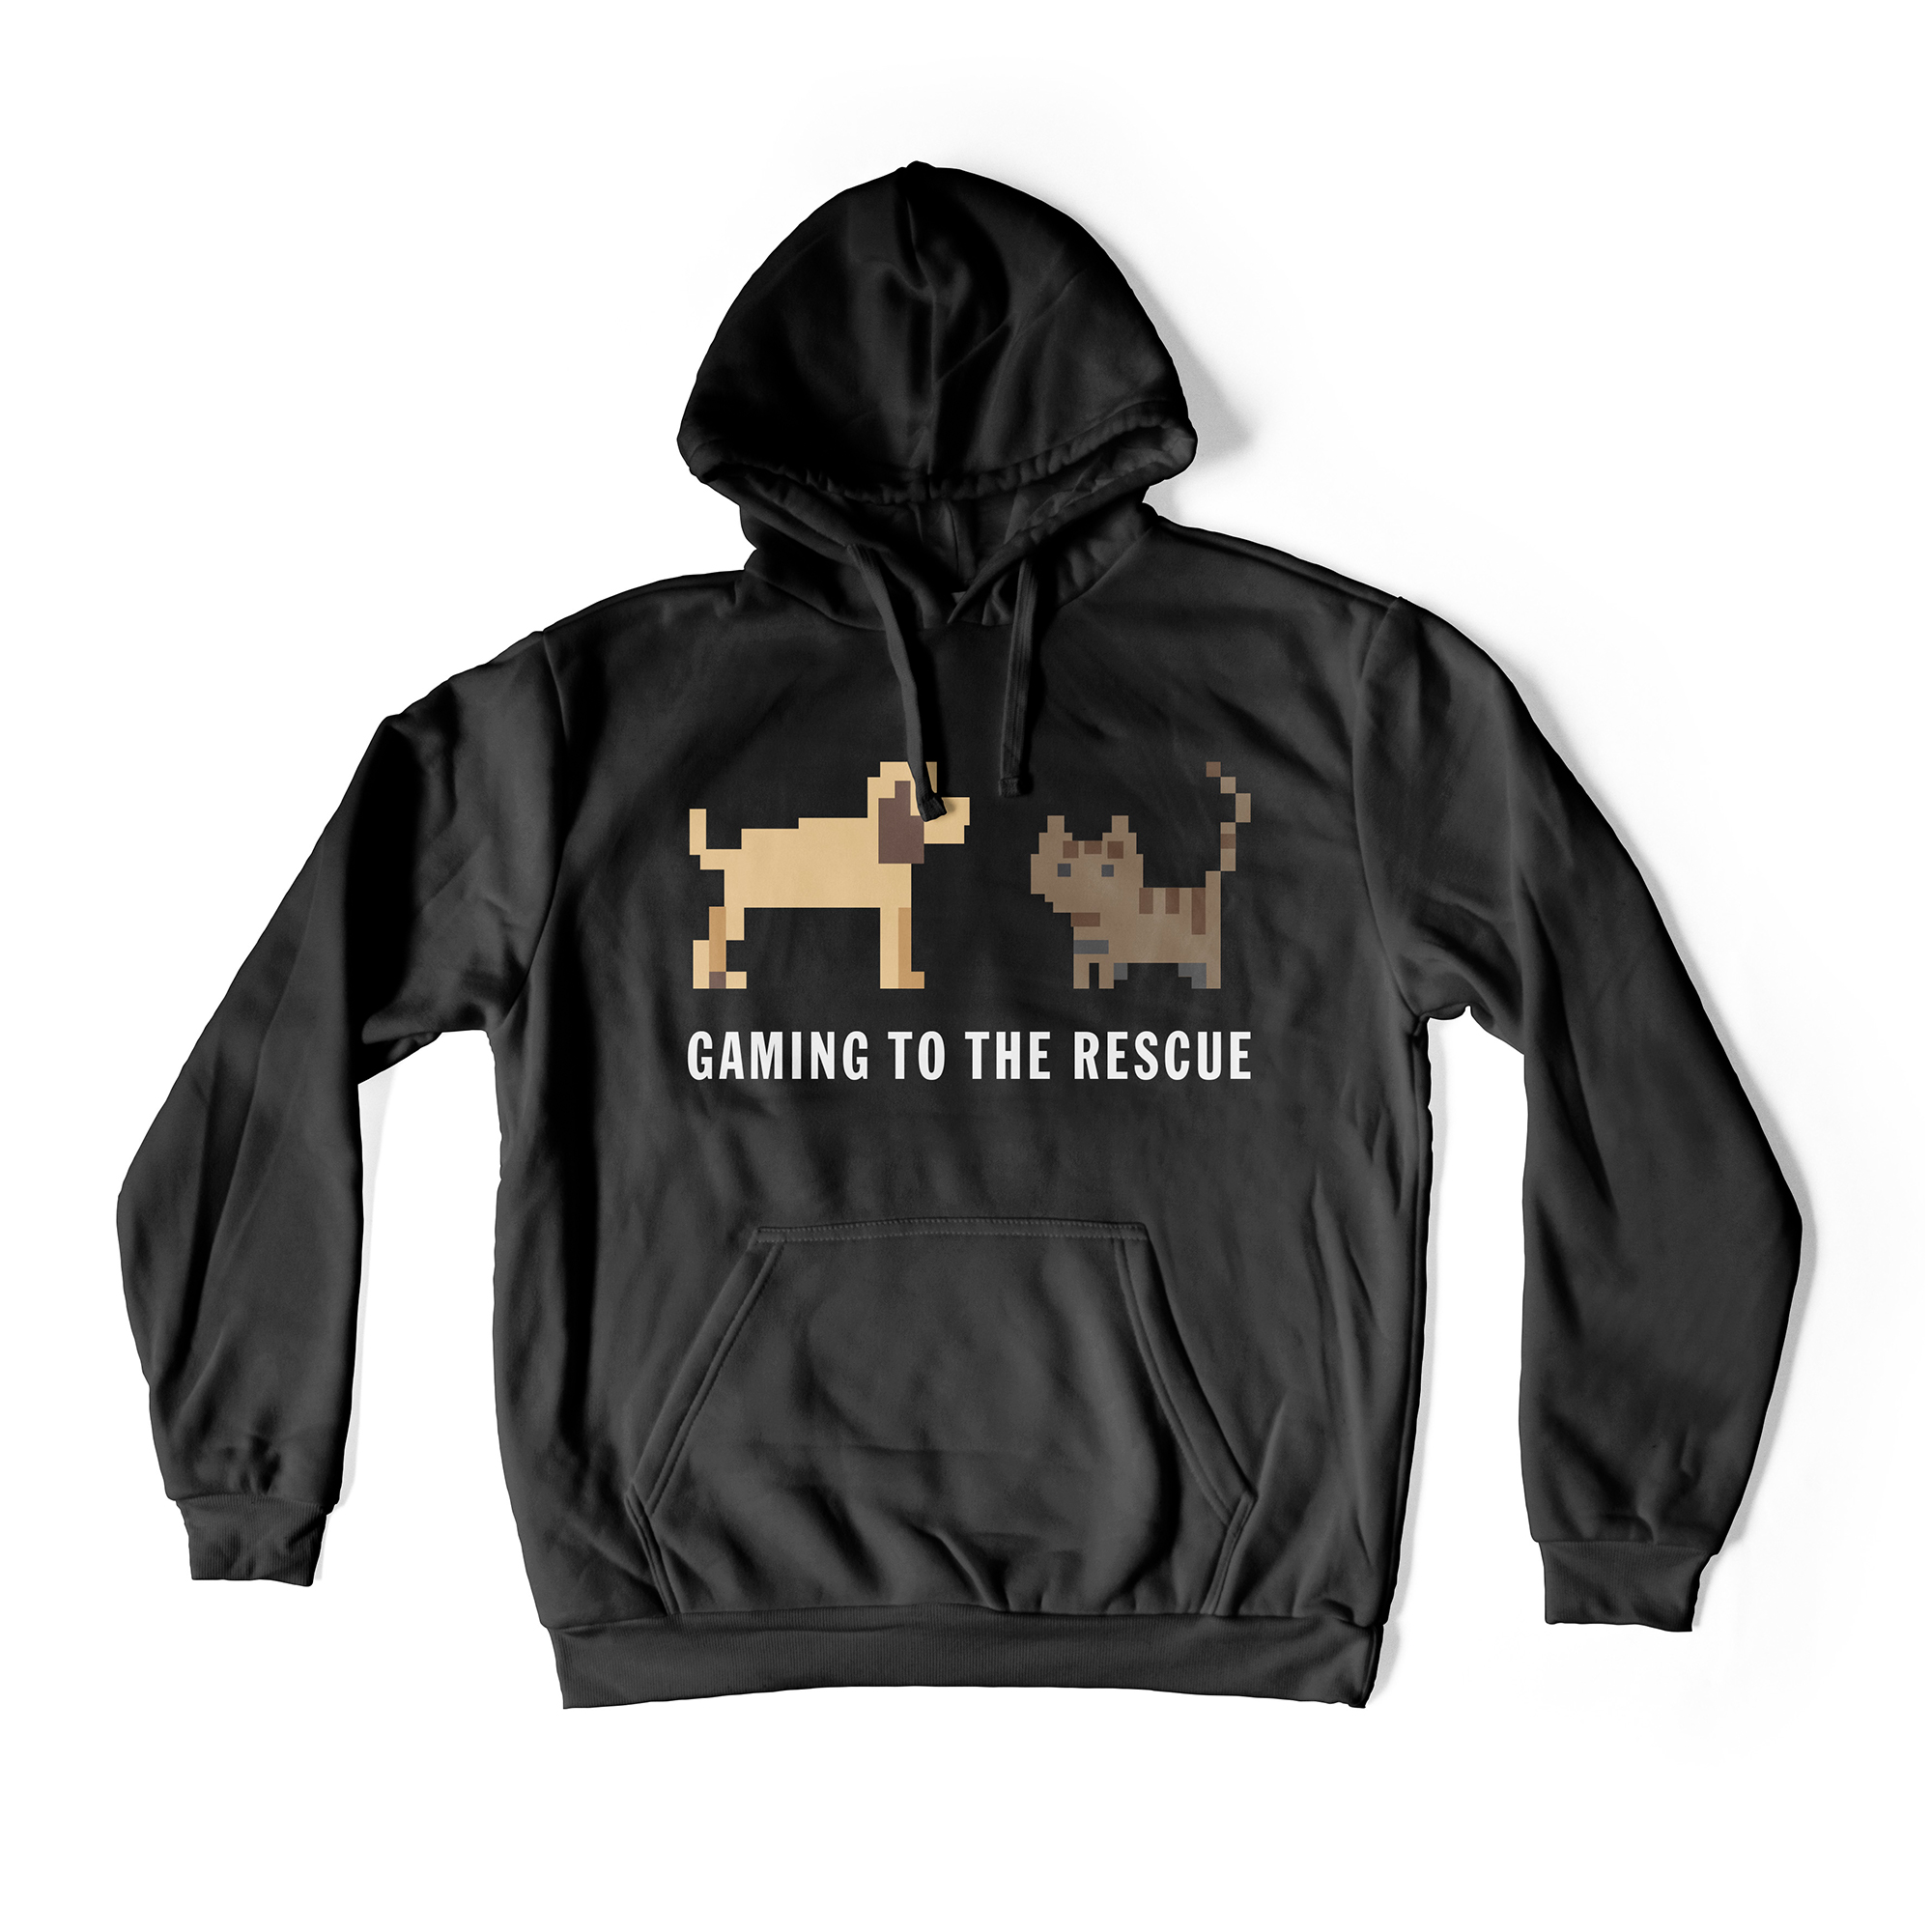 Gaming to the rescue branded hoodie in black